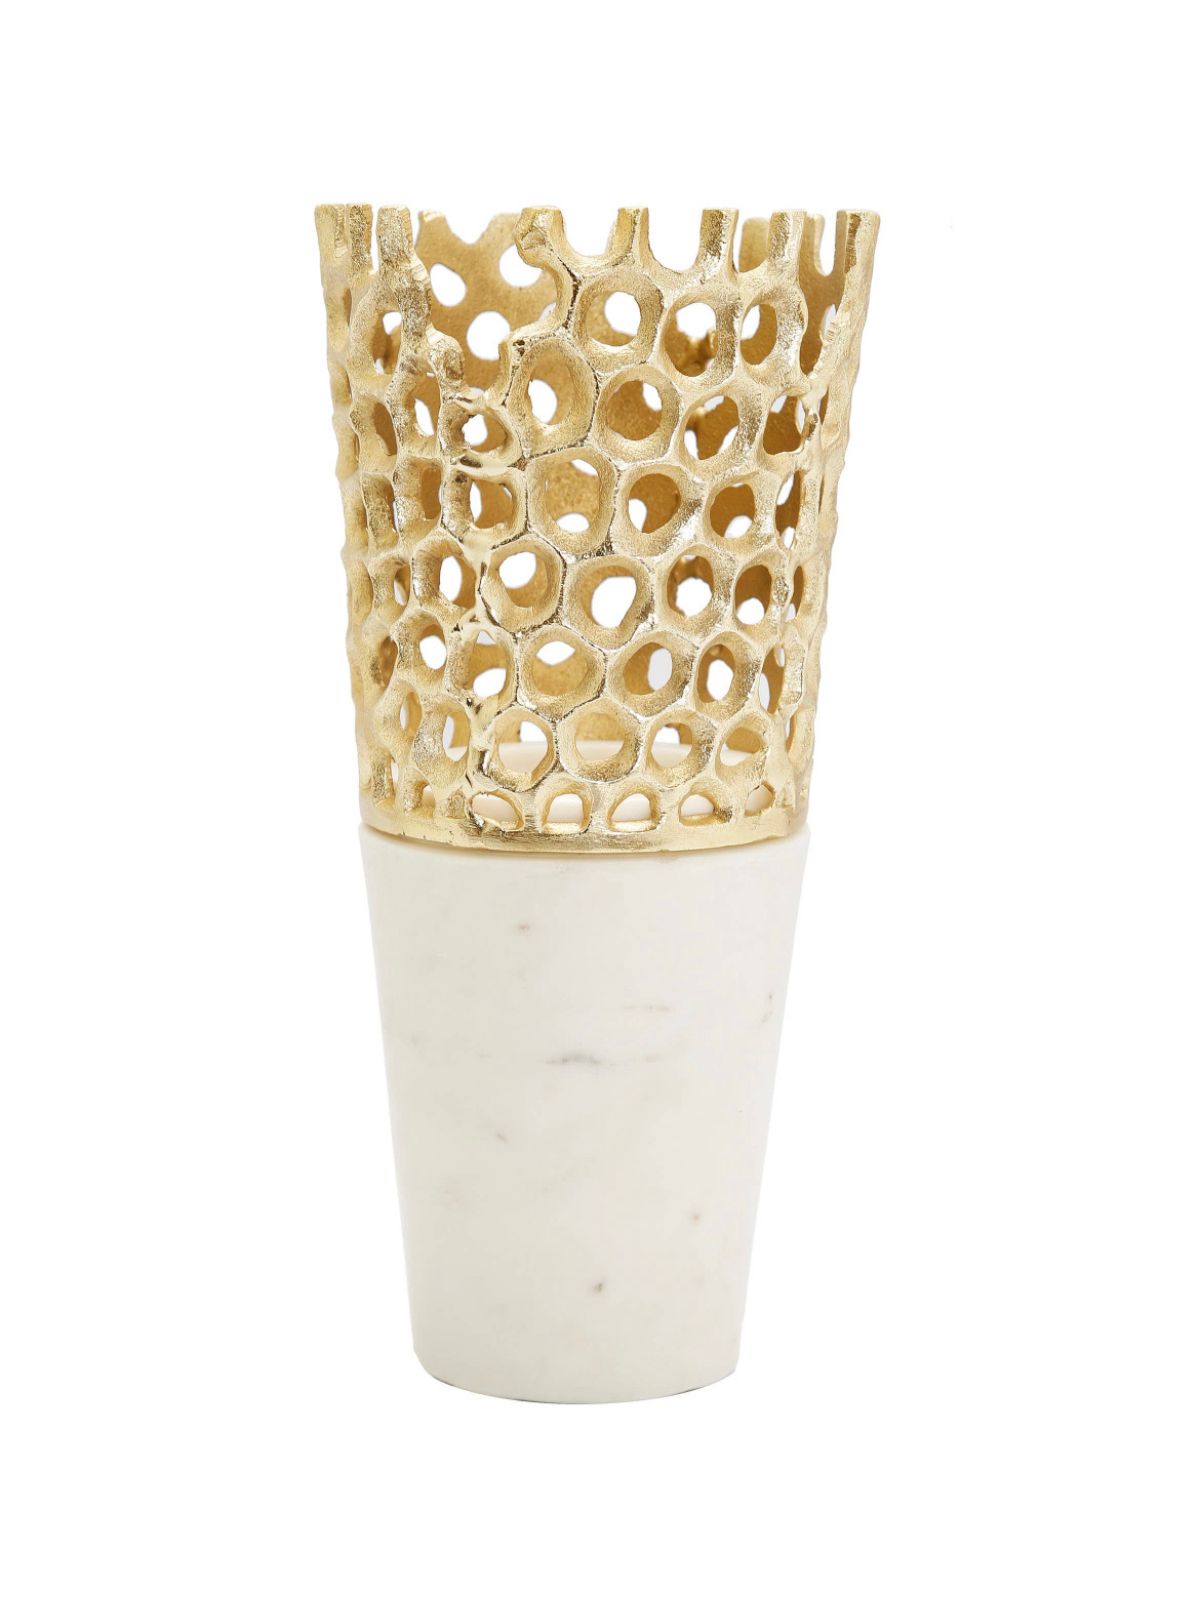 Luxury White Marble Decorative Vase With Gold Cut Out Design 12H - KYA Home Decor. 